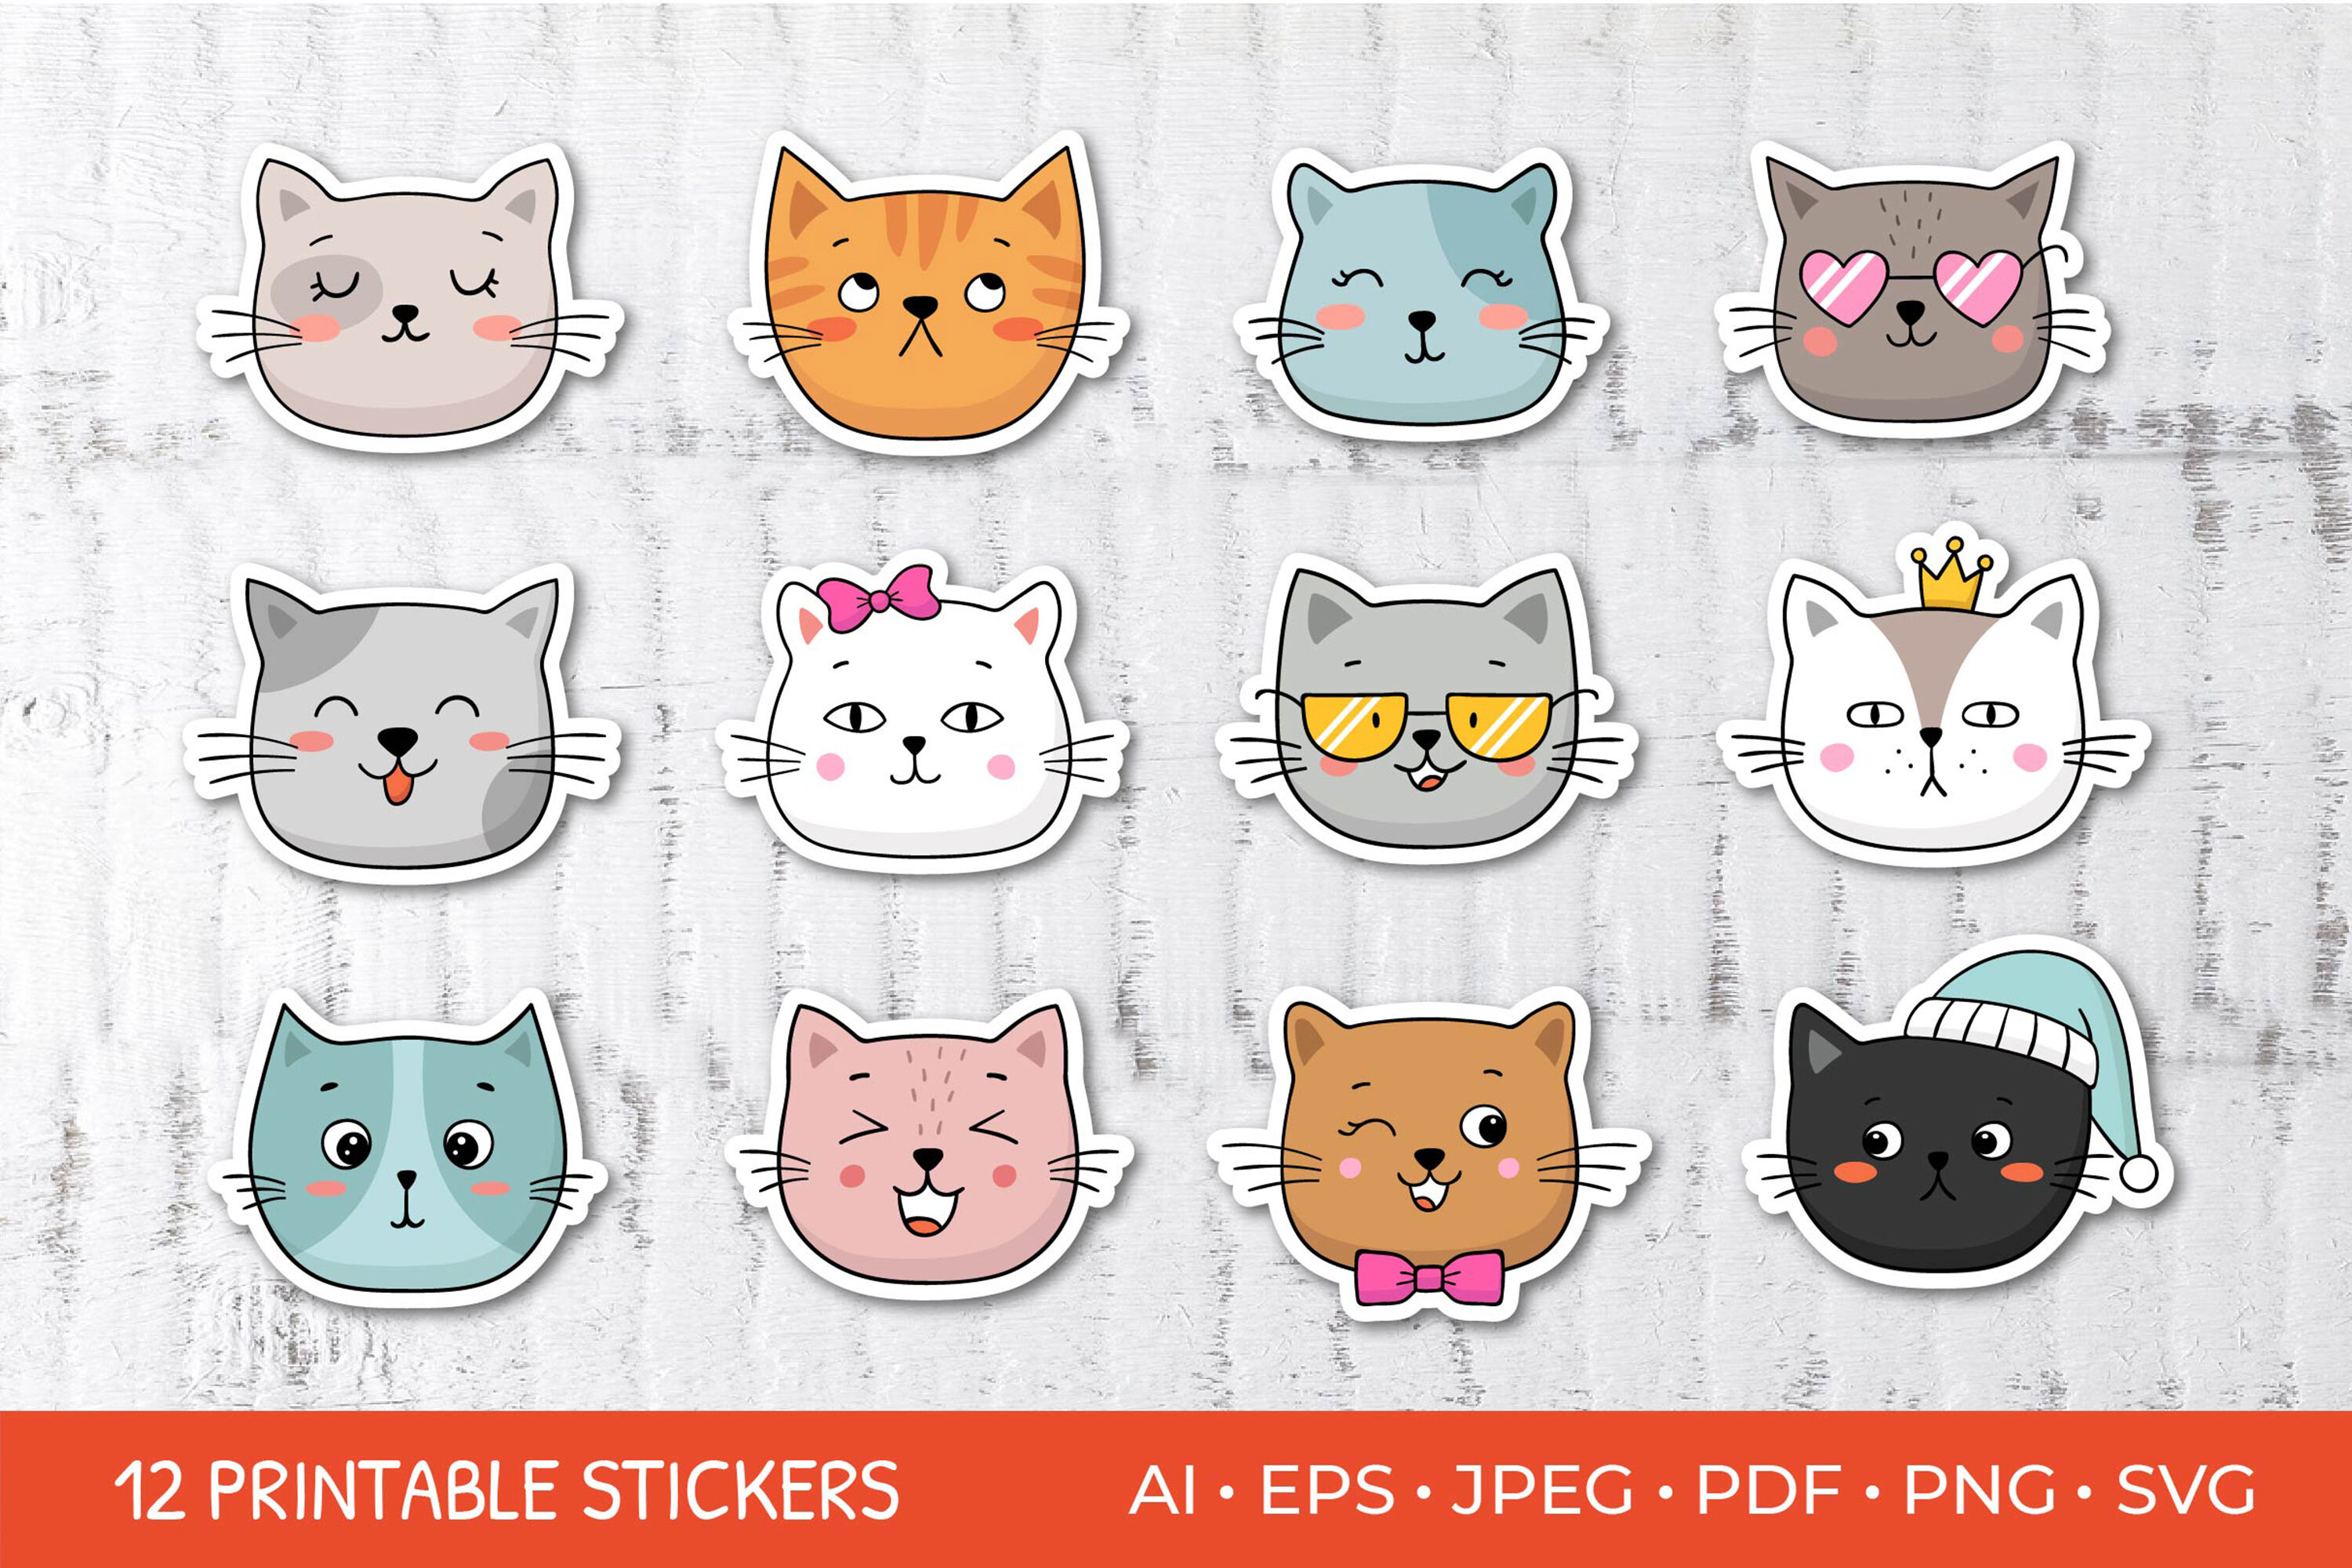 Cute Cat Faces Stickers, Printable Sticker Bundle By Yuliya Lins